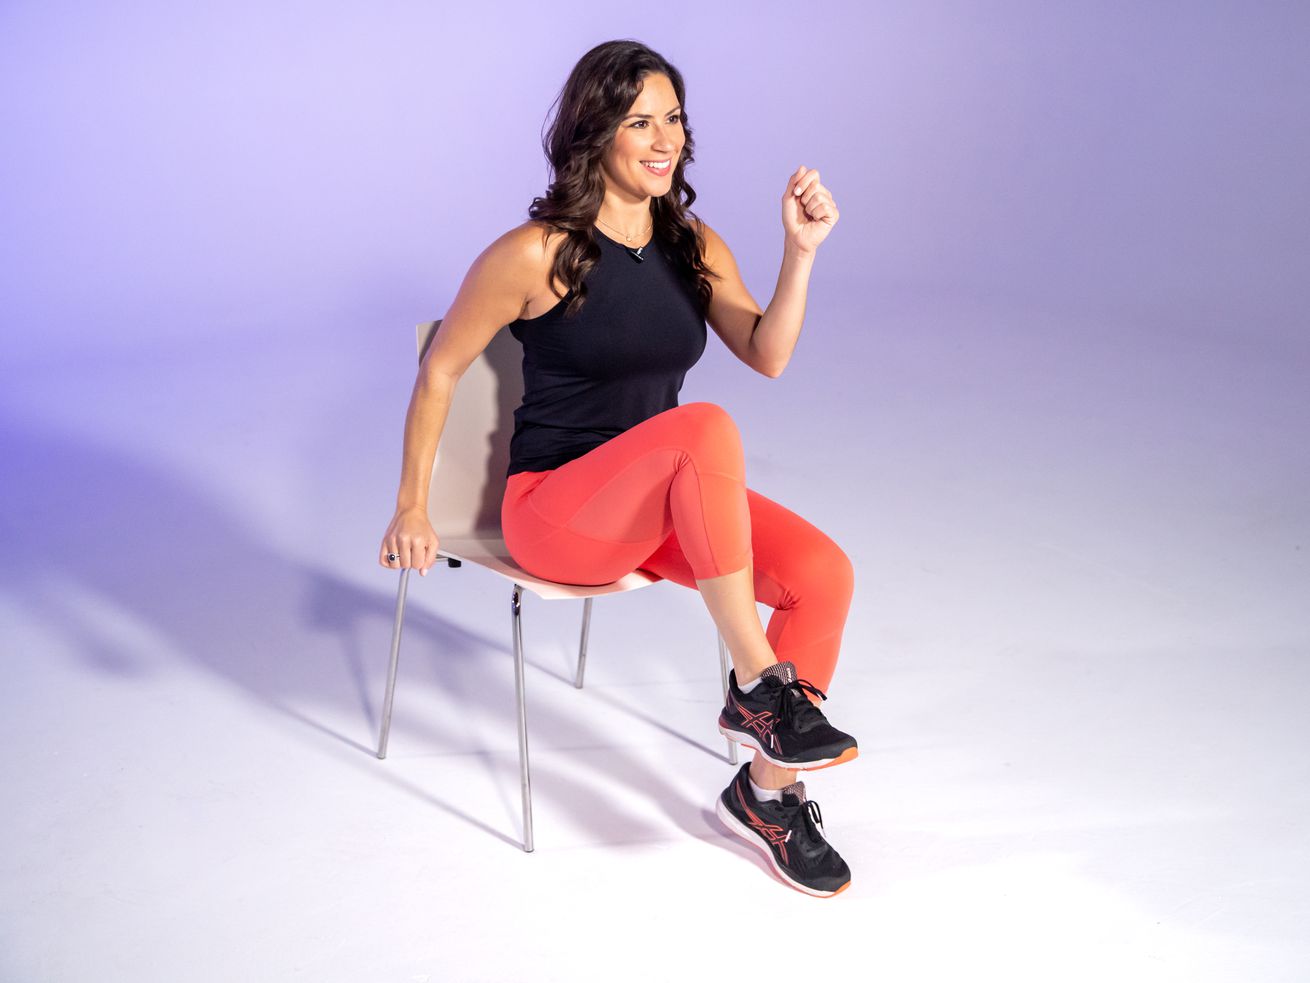 Marching in place can help with circulation after a long day of sitting and is part of health and fitness expert Stephanie Mansour’s cubicle crunch workout.